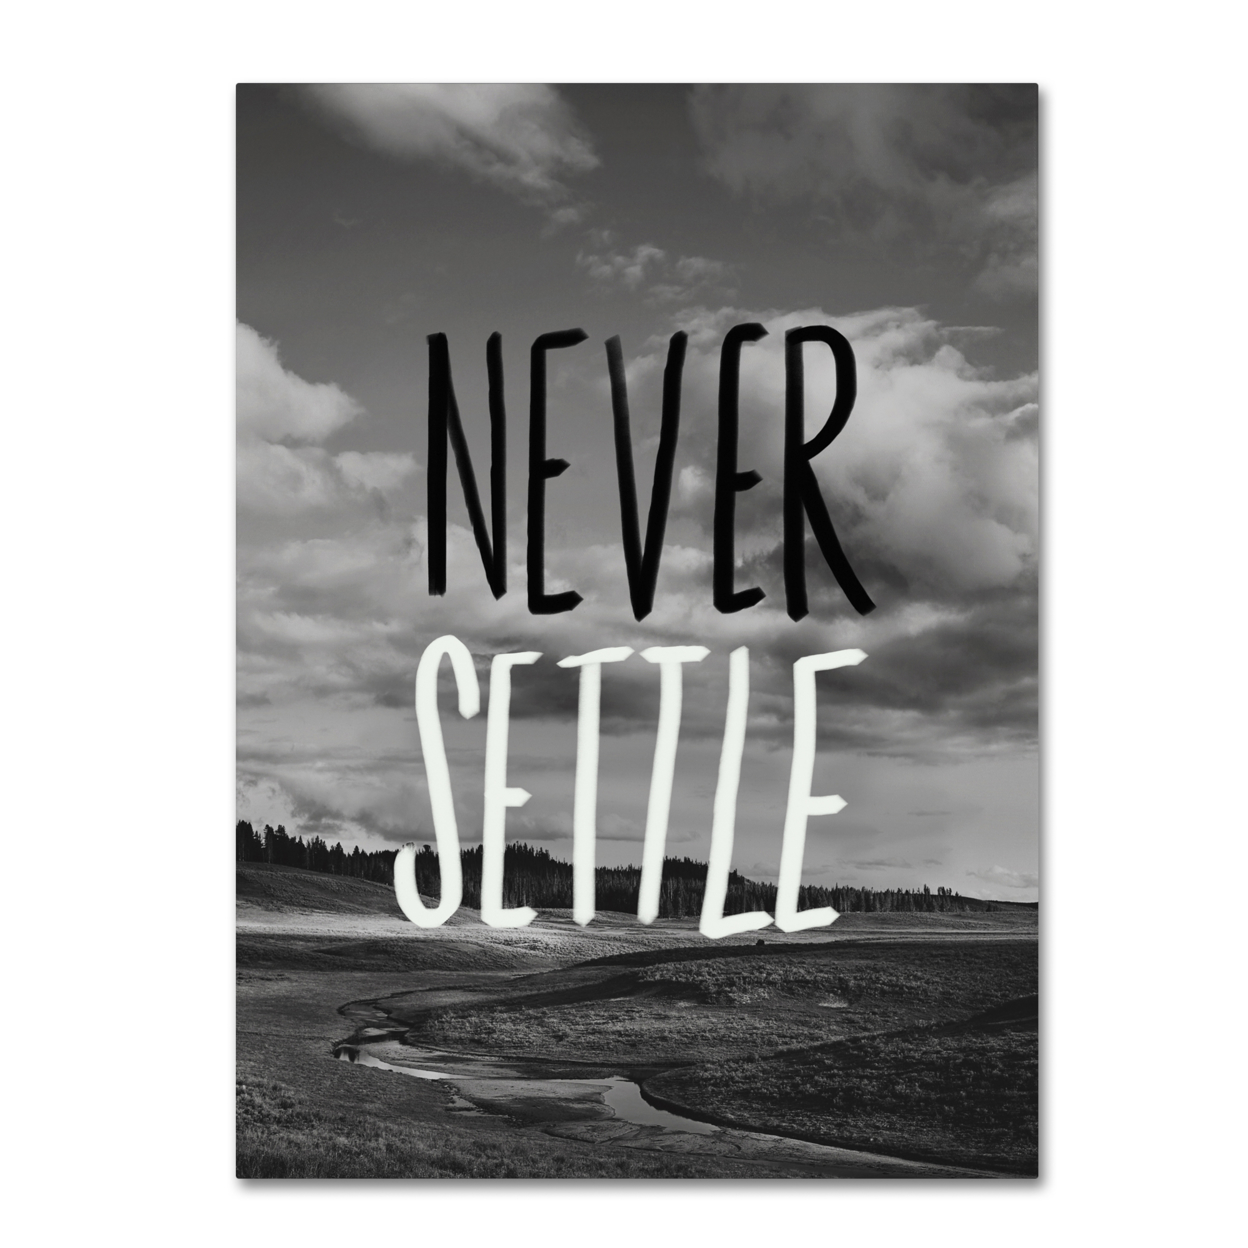 Leah Flores 'Never Settle' Canvas Wall Art 35 X 47 Inches